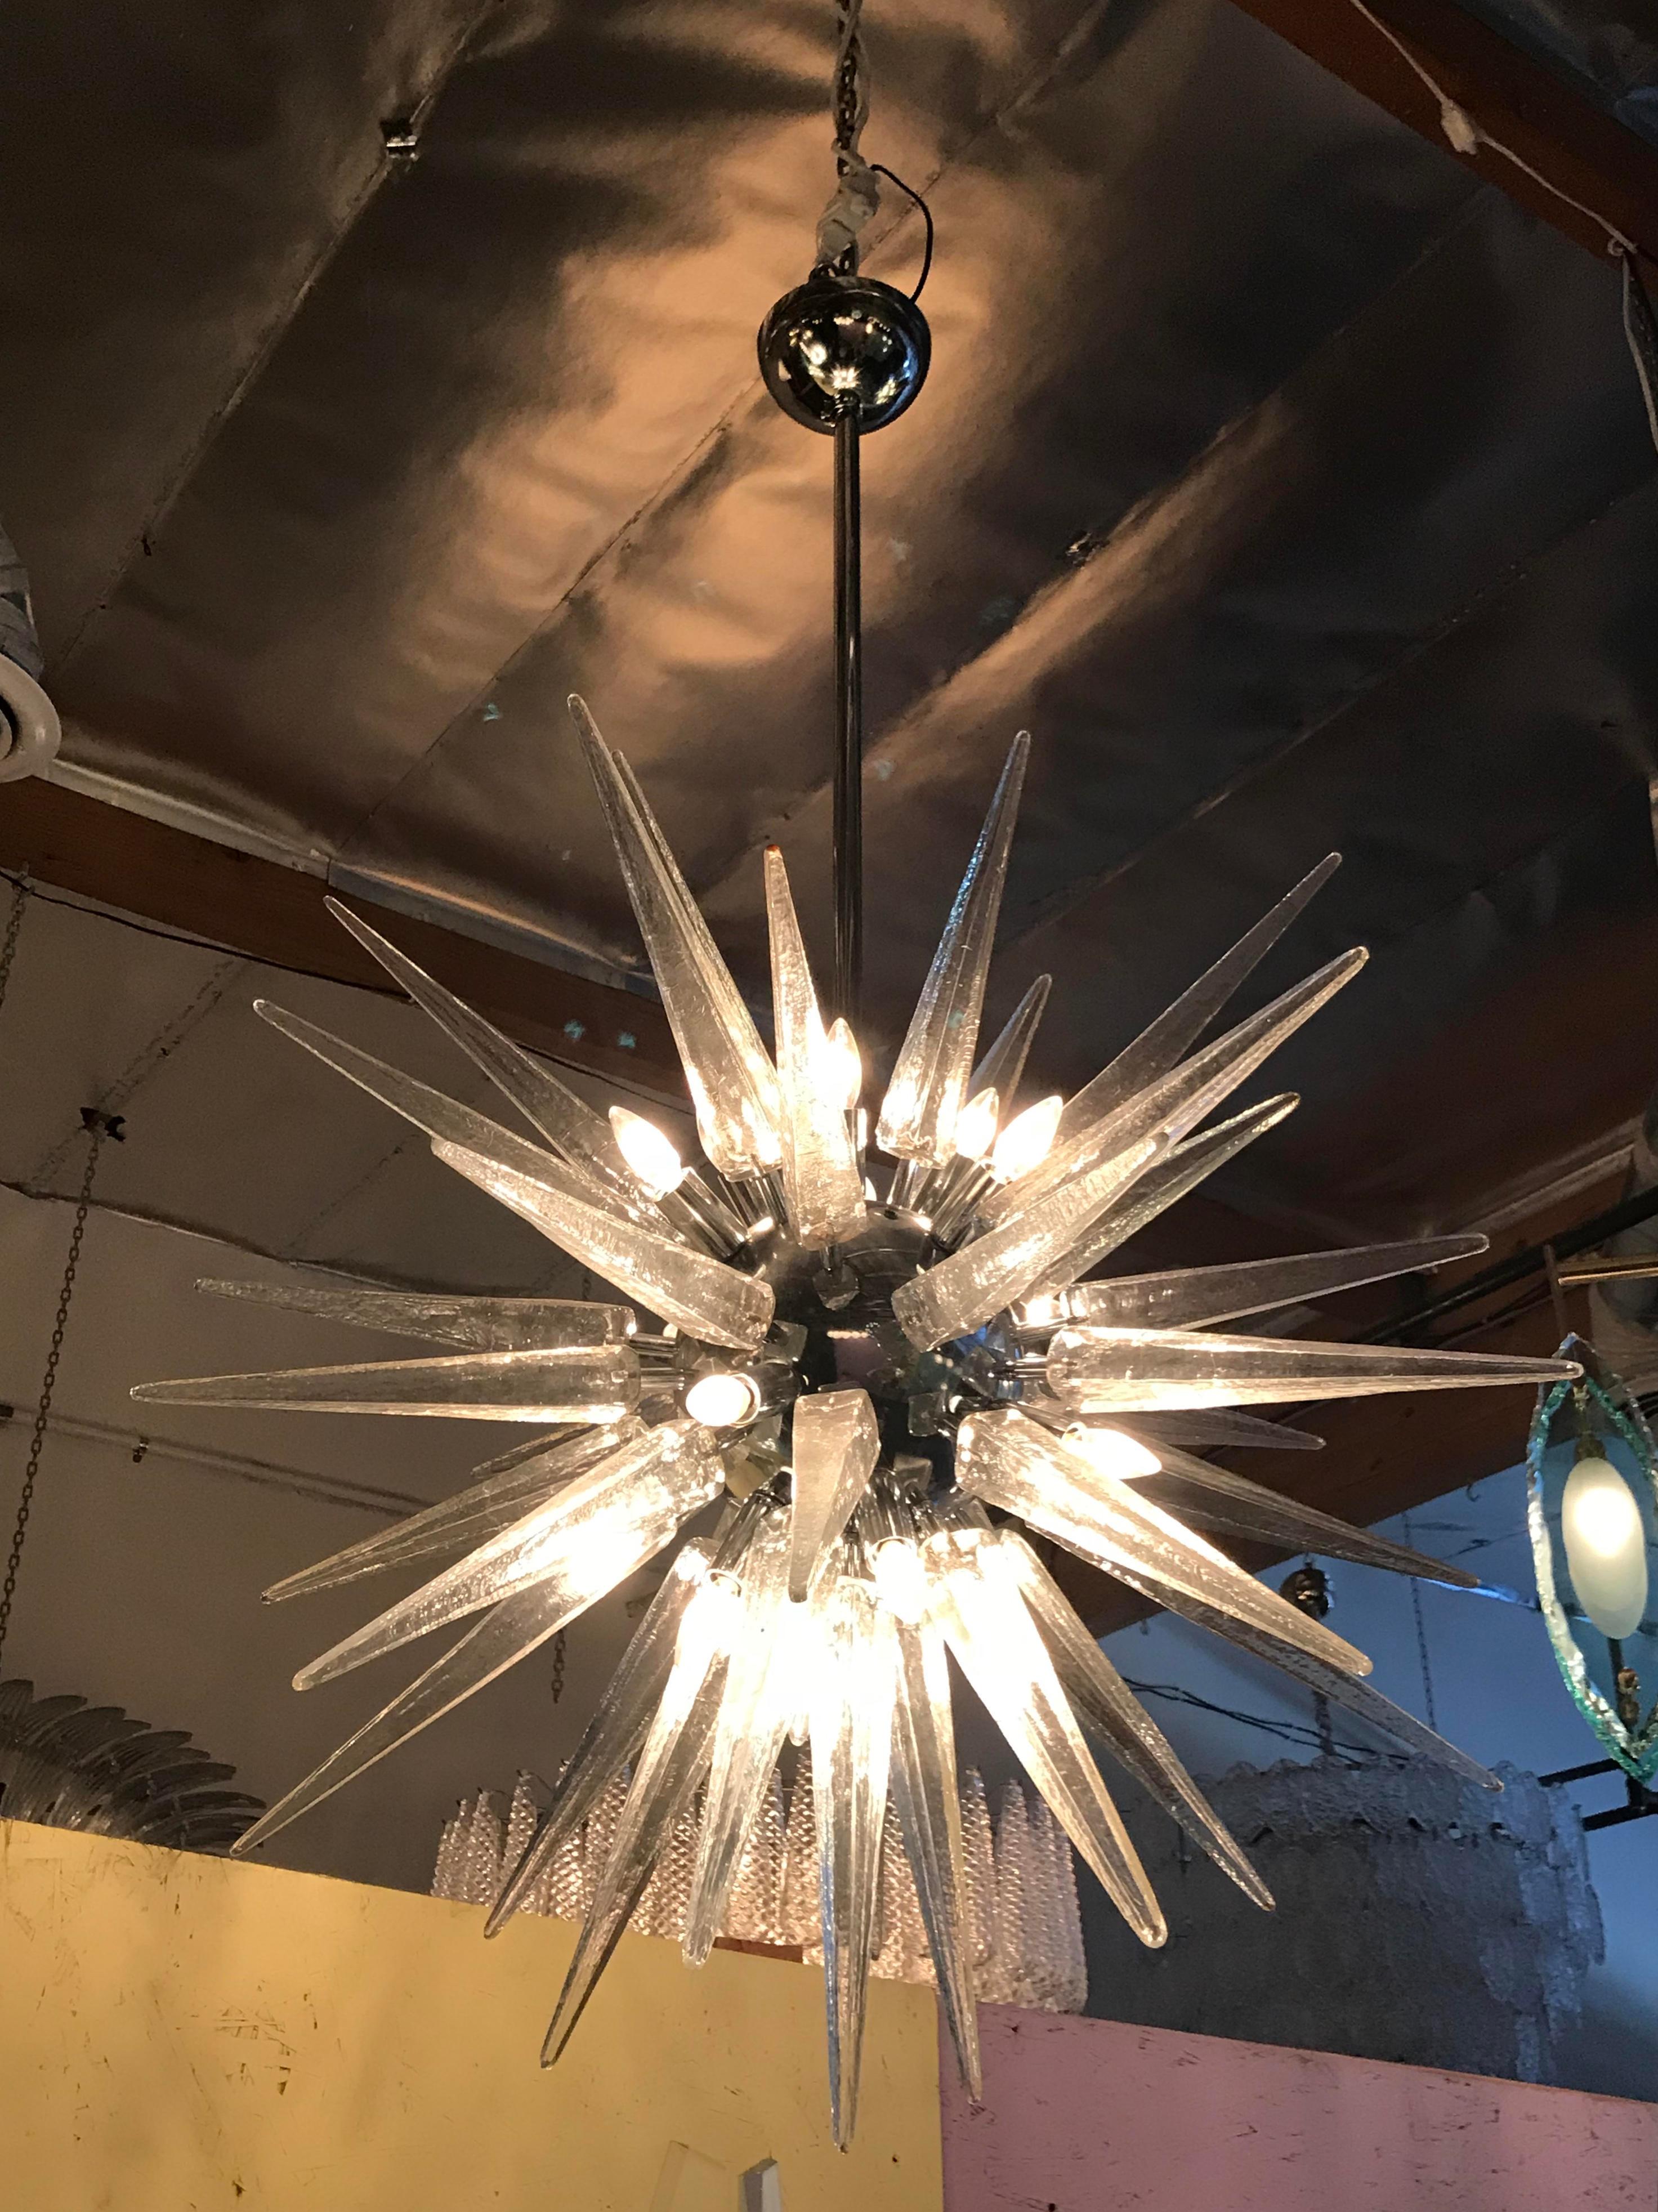 Italian modern Sputnik chandelier with clear Murano glass shards spikes, mounted on chrome metal frame / Designed by Fabio Bergomi for Fabio Ltd / Made in Italy 
16 lights / E12 or E14 type / max 40W each
Diameter: 35 inches / Height: 55 inches